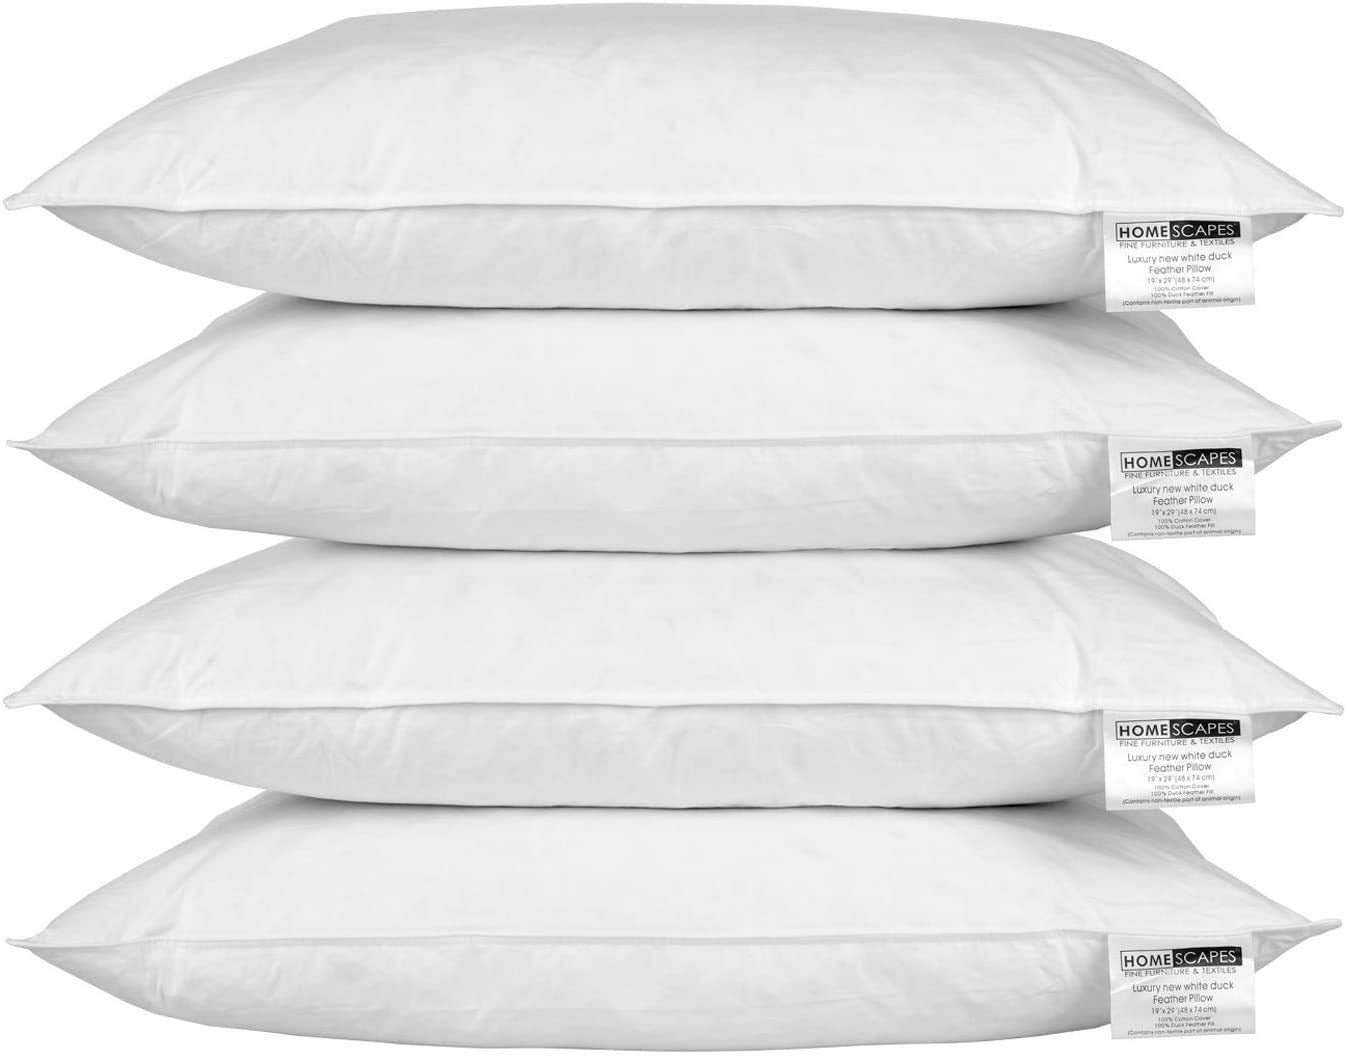 HOMESCAPES - White Duck Feather Pillow Pack of 4 Pillows (Set of 2 Pairs) - Machine Washable - Hypo Allergenic & Anti Dust Mite RDS Certified.